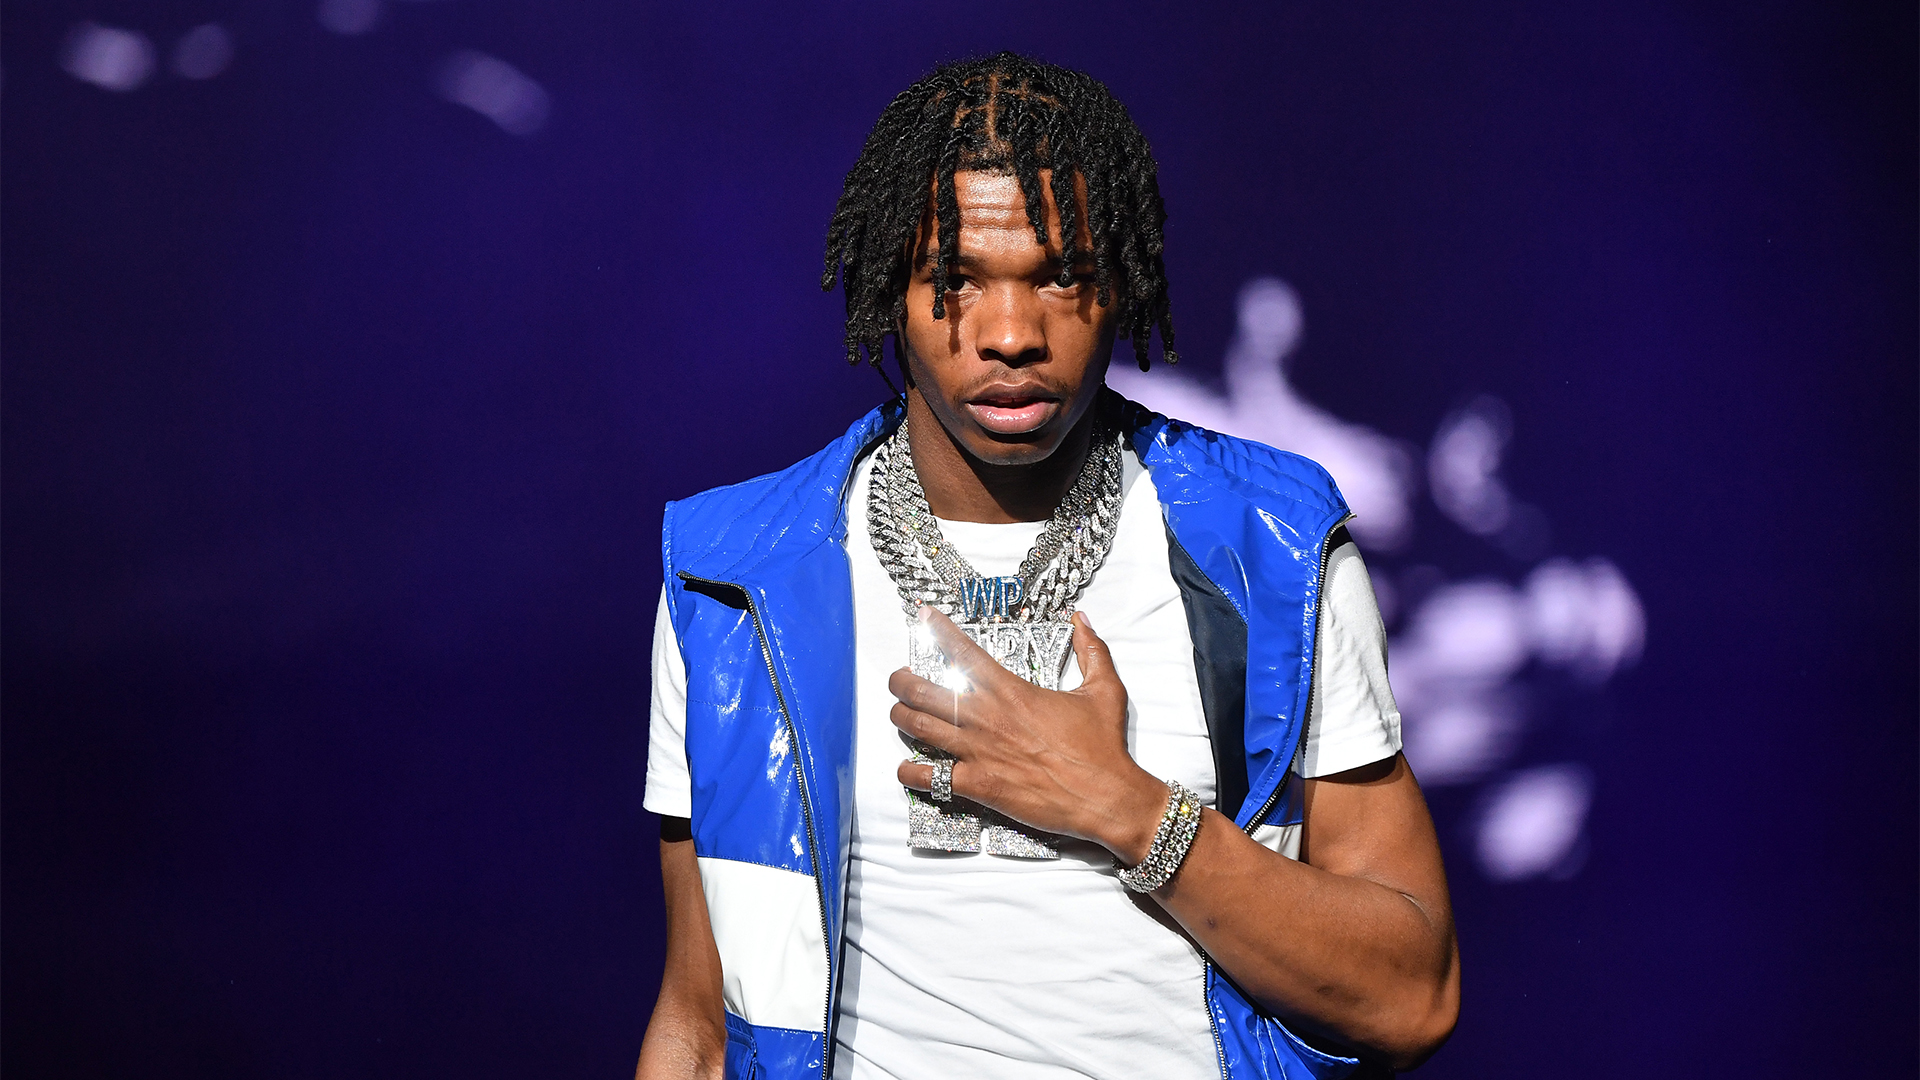 Lil Baby Teams Up With Food Waste Startup Goodr As A Part Of His Annual Back To School Bash In Atlanta